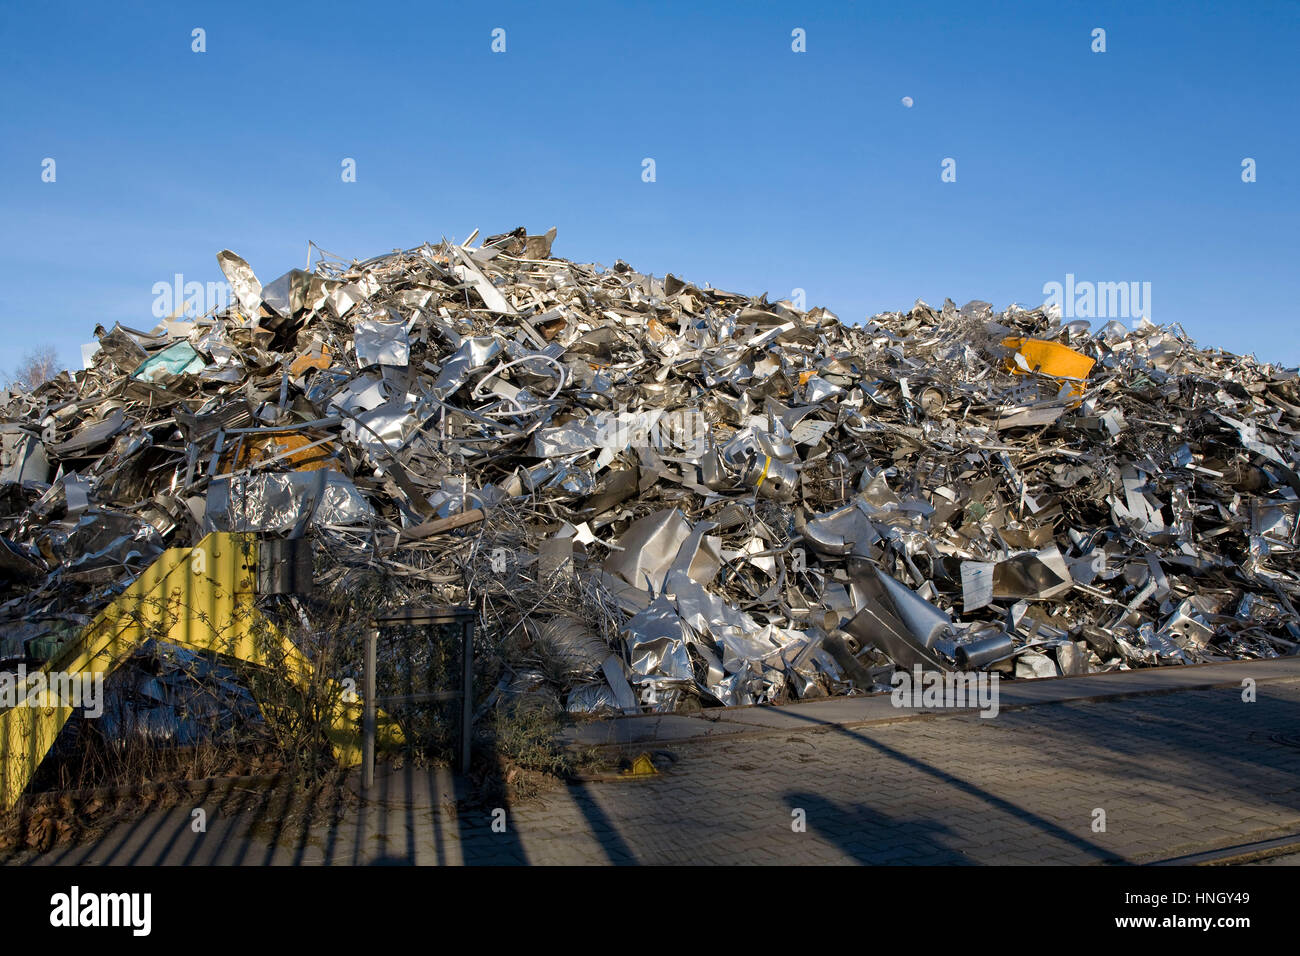 Germany, Ruhr Area, Dortmund, the harbor at the Dortmund-Ems-Canal, scrap yard with old metal. Stock Photo